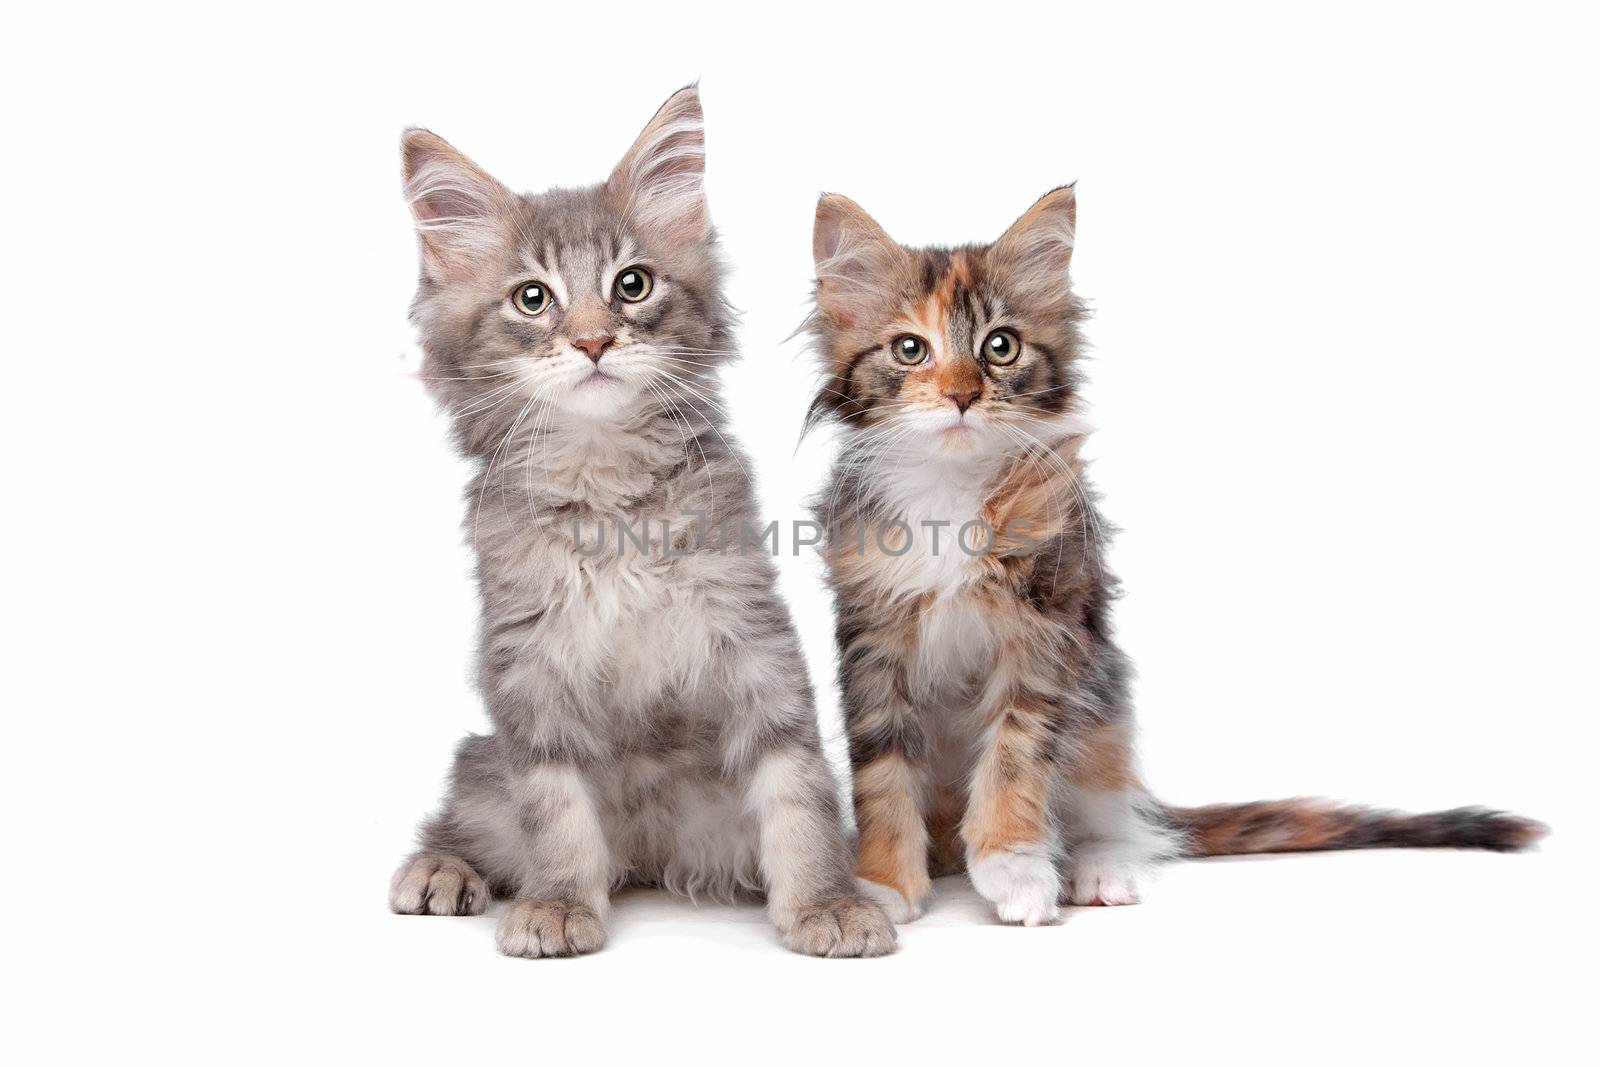 Maine Coon kittens by eriklam